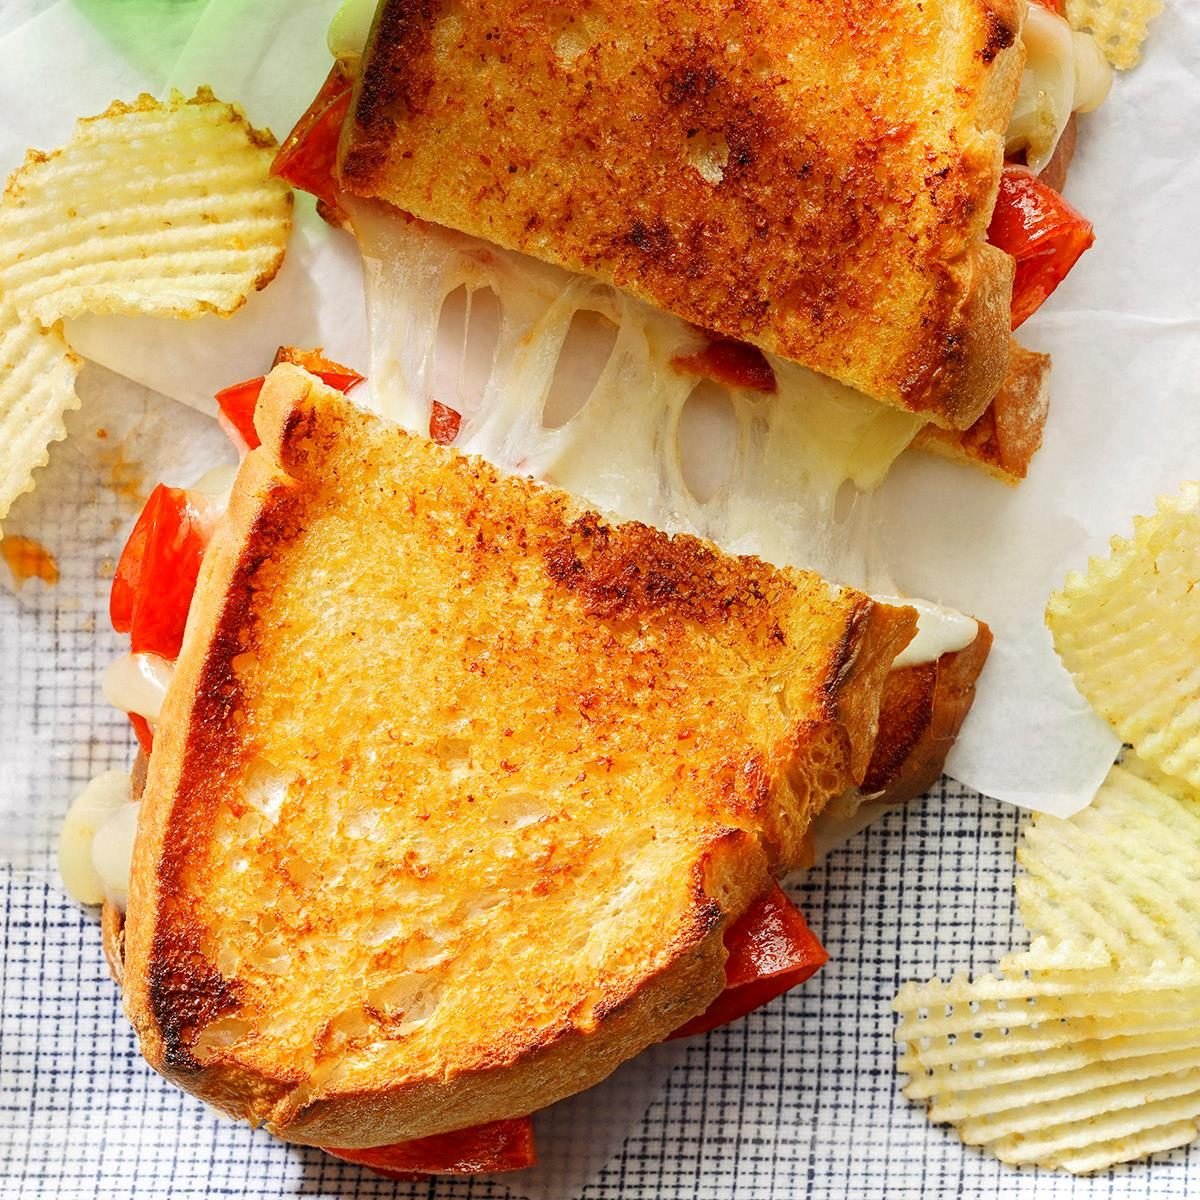 https://www.tasteofhome.com/wp-content/uploads/2018/04/Grilled-Cheese-Pepperoni-Sandwich_EXPS_CFFBZ22_229394_B10_01_1b.jpg?fit=700%2C1024